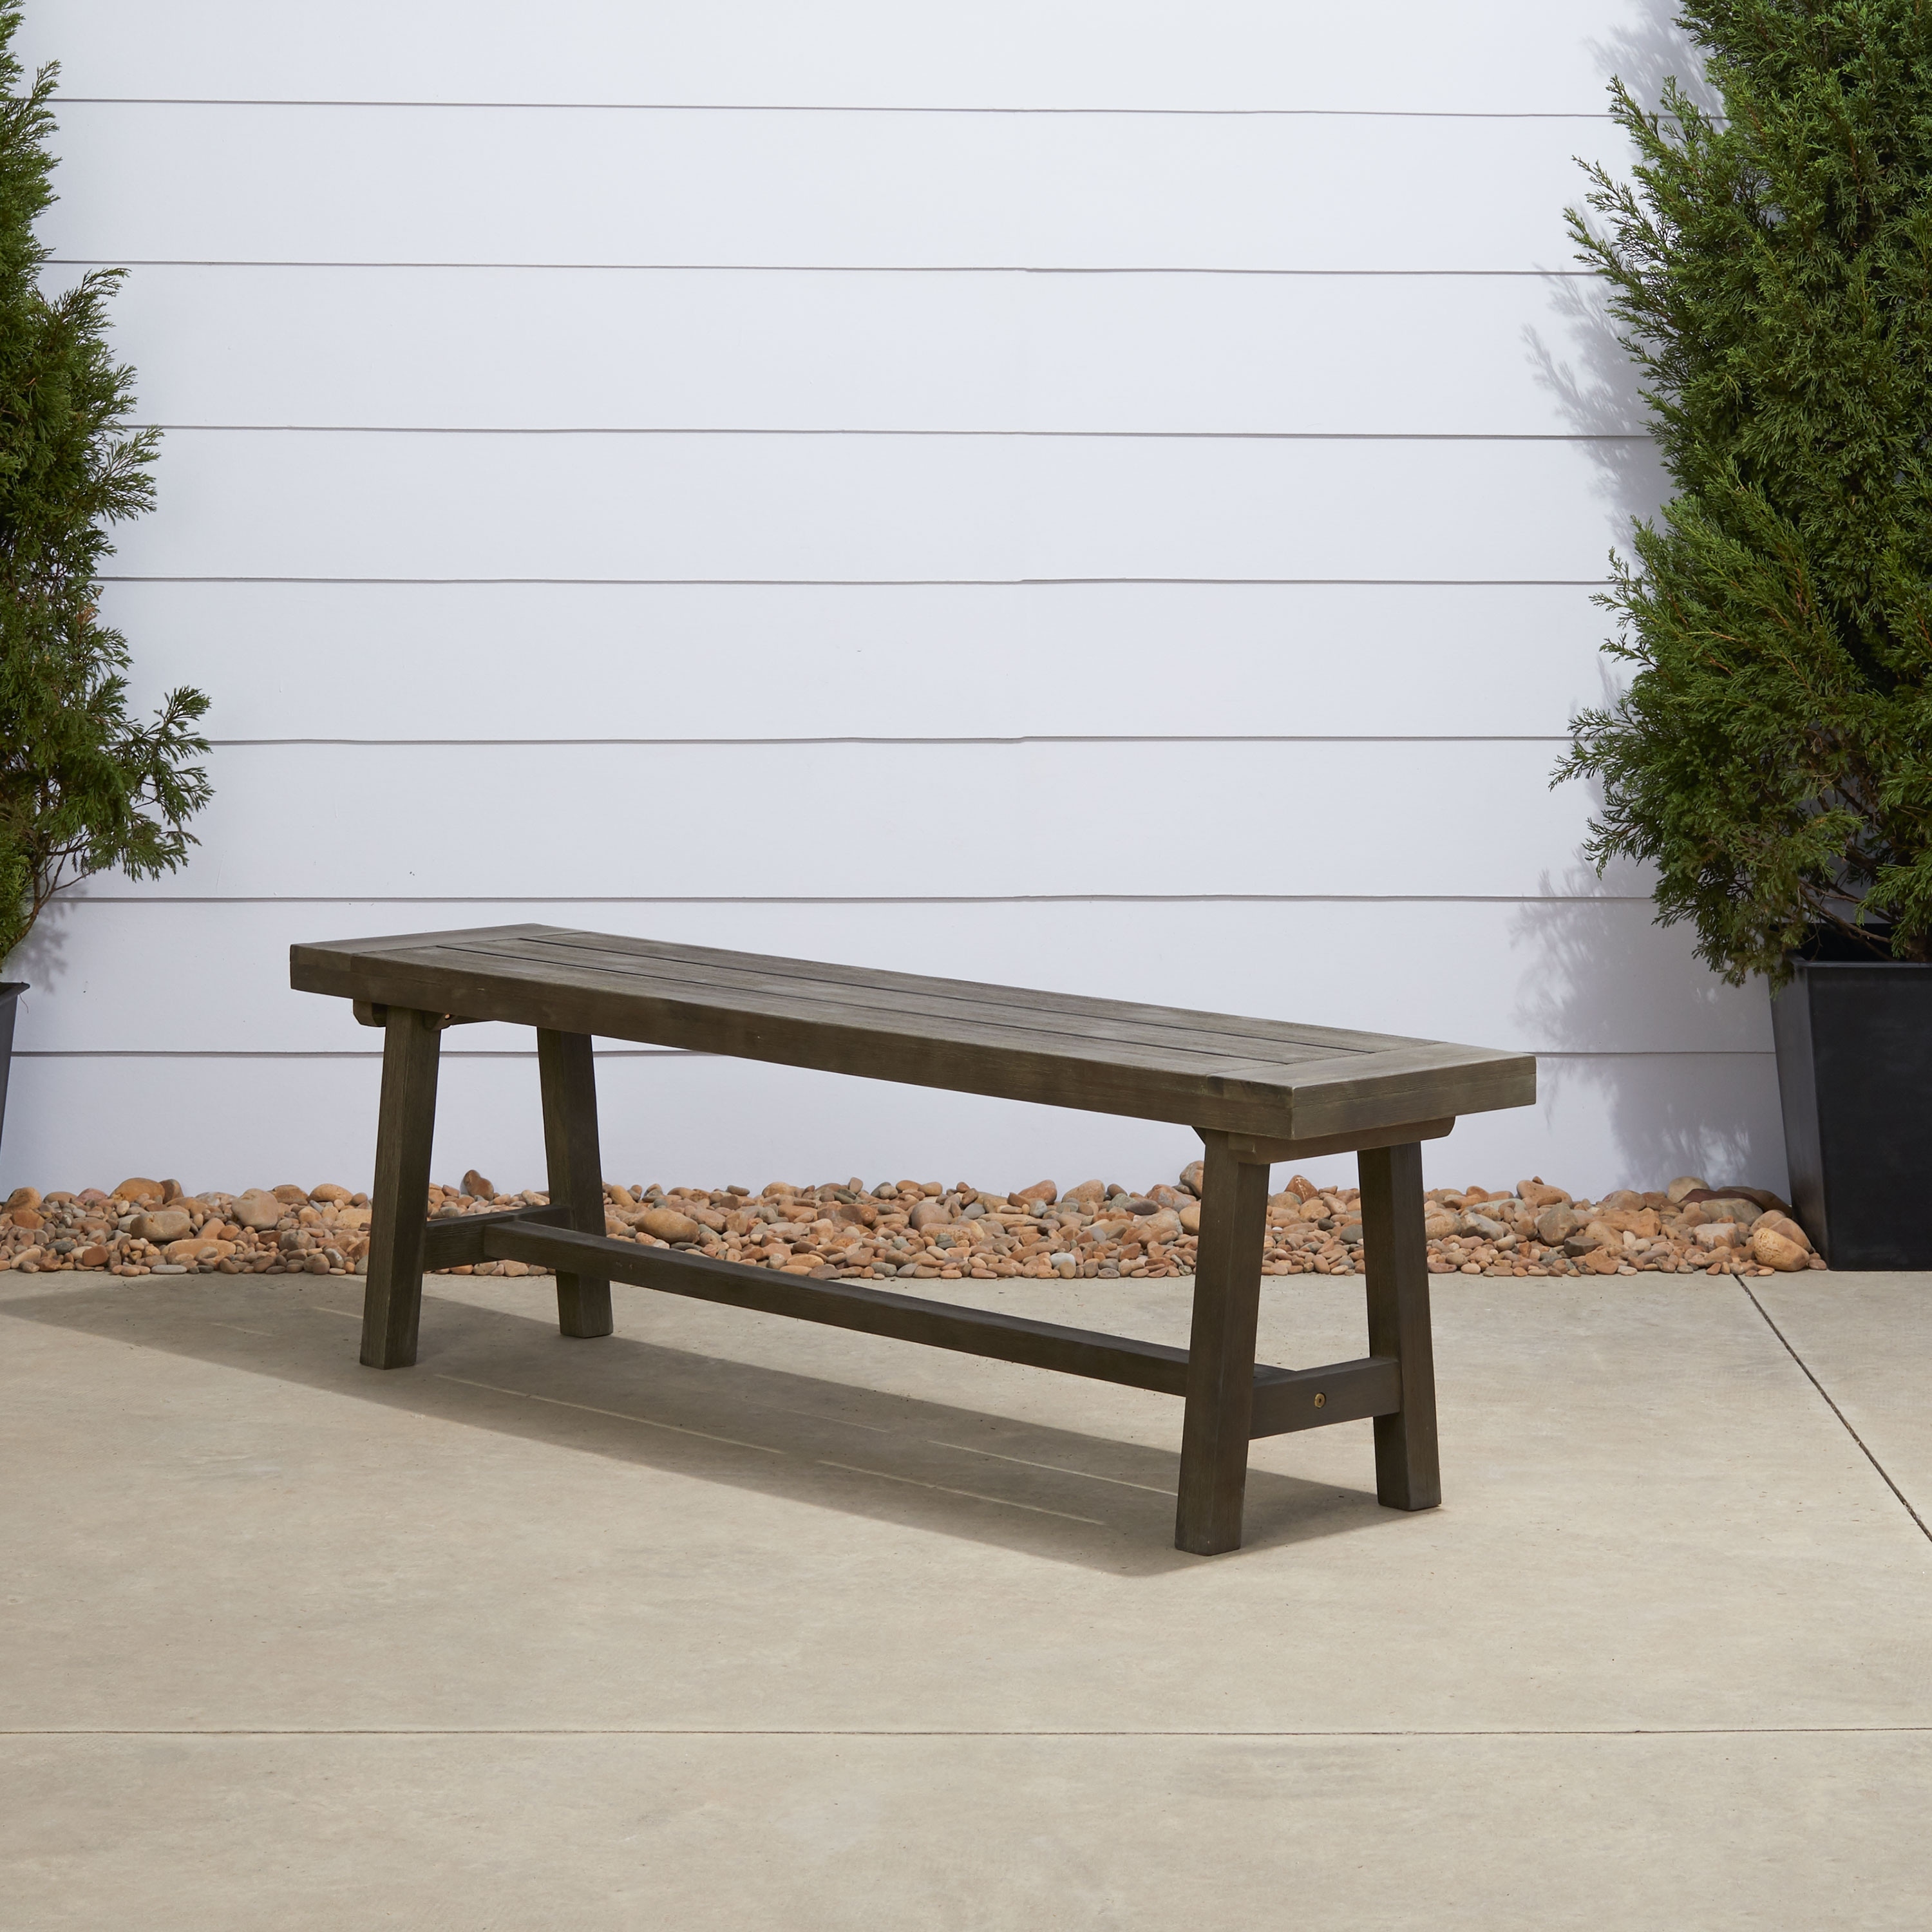 Renaissance Outdoor Patio Dining Picnic Bench - Bed Bath & Beyond